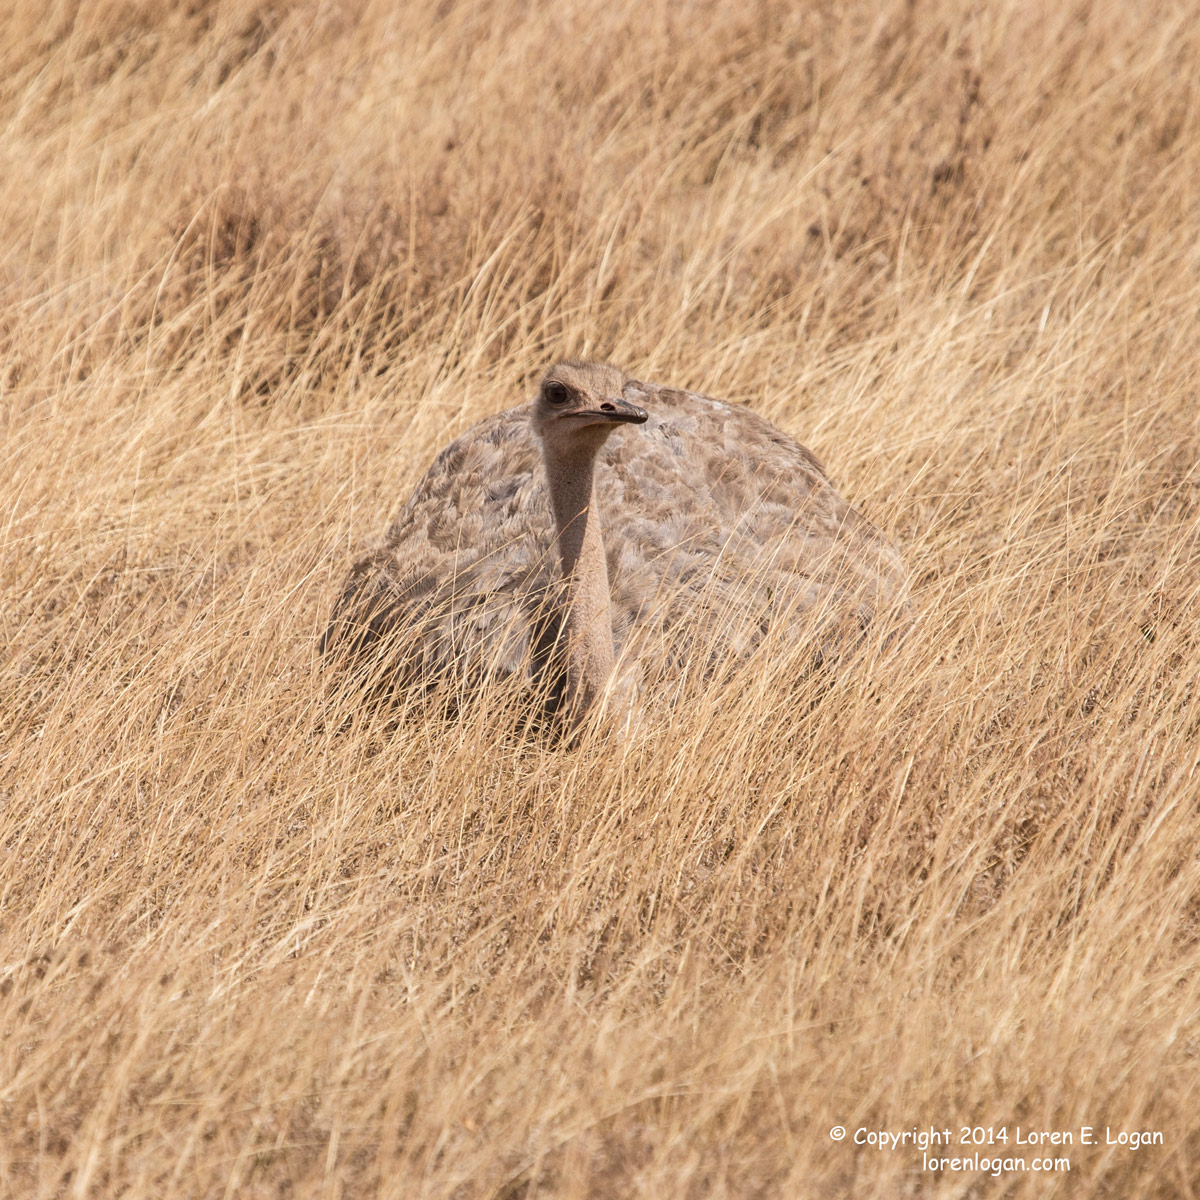 Ostrich, settled down in the long rustling grass in Ngorongoro Crater.